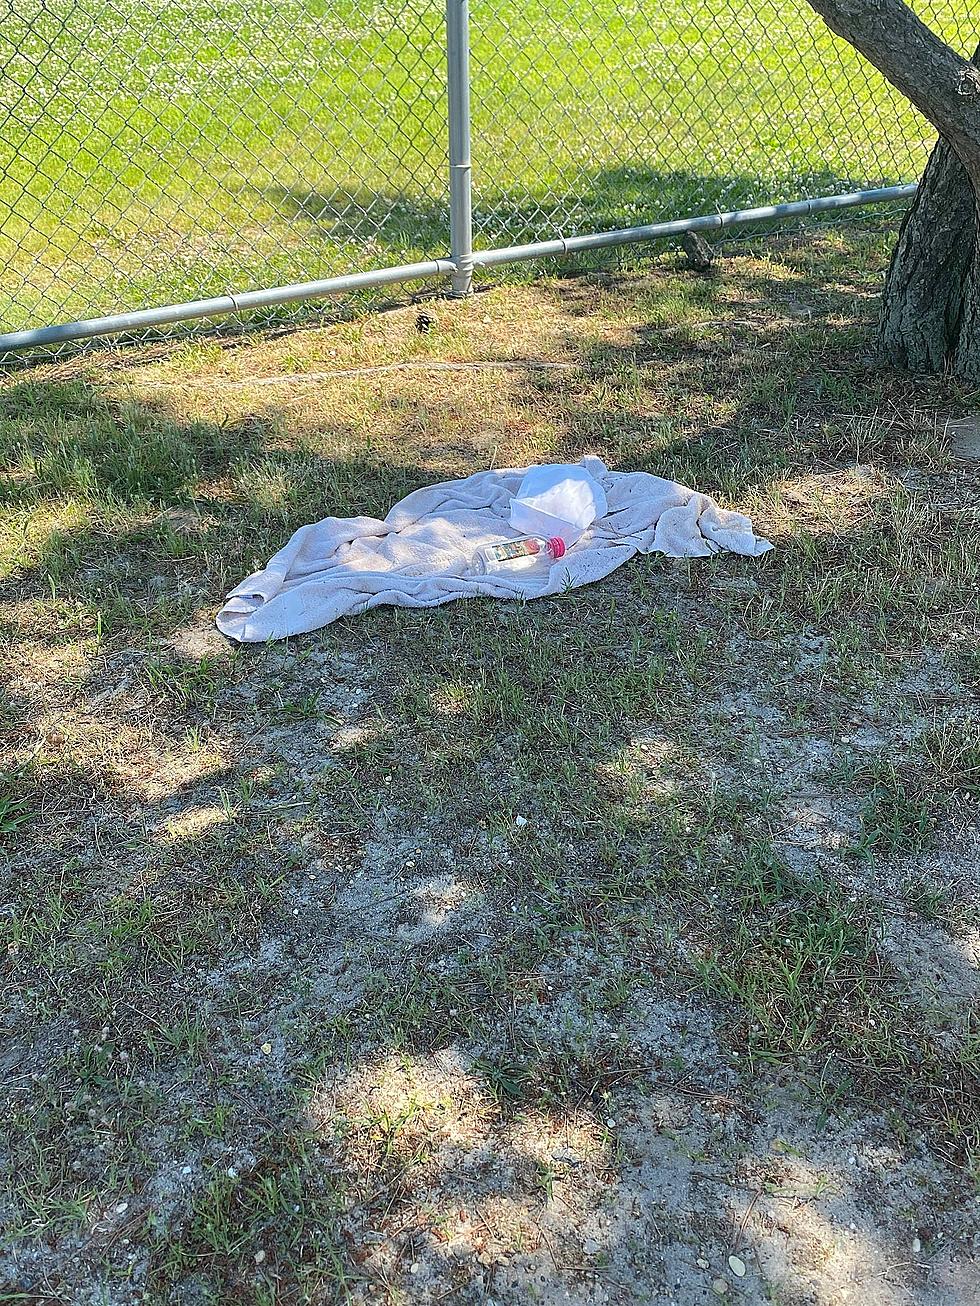 We’ve Already Seen Littering In South Jersey, NJ But This Reaches A New Level Of Unacceptable